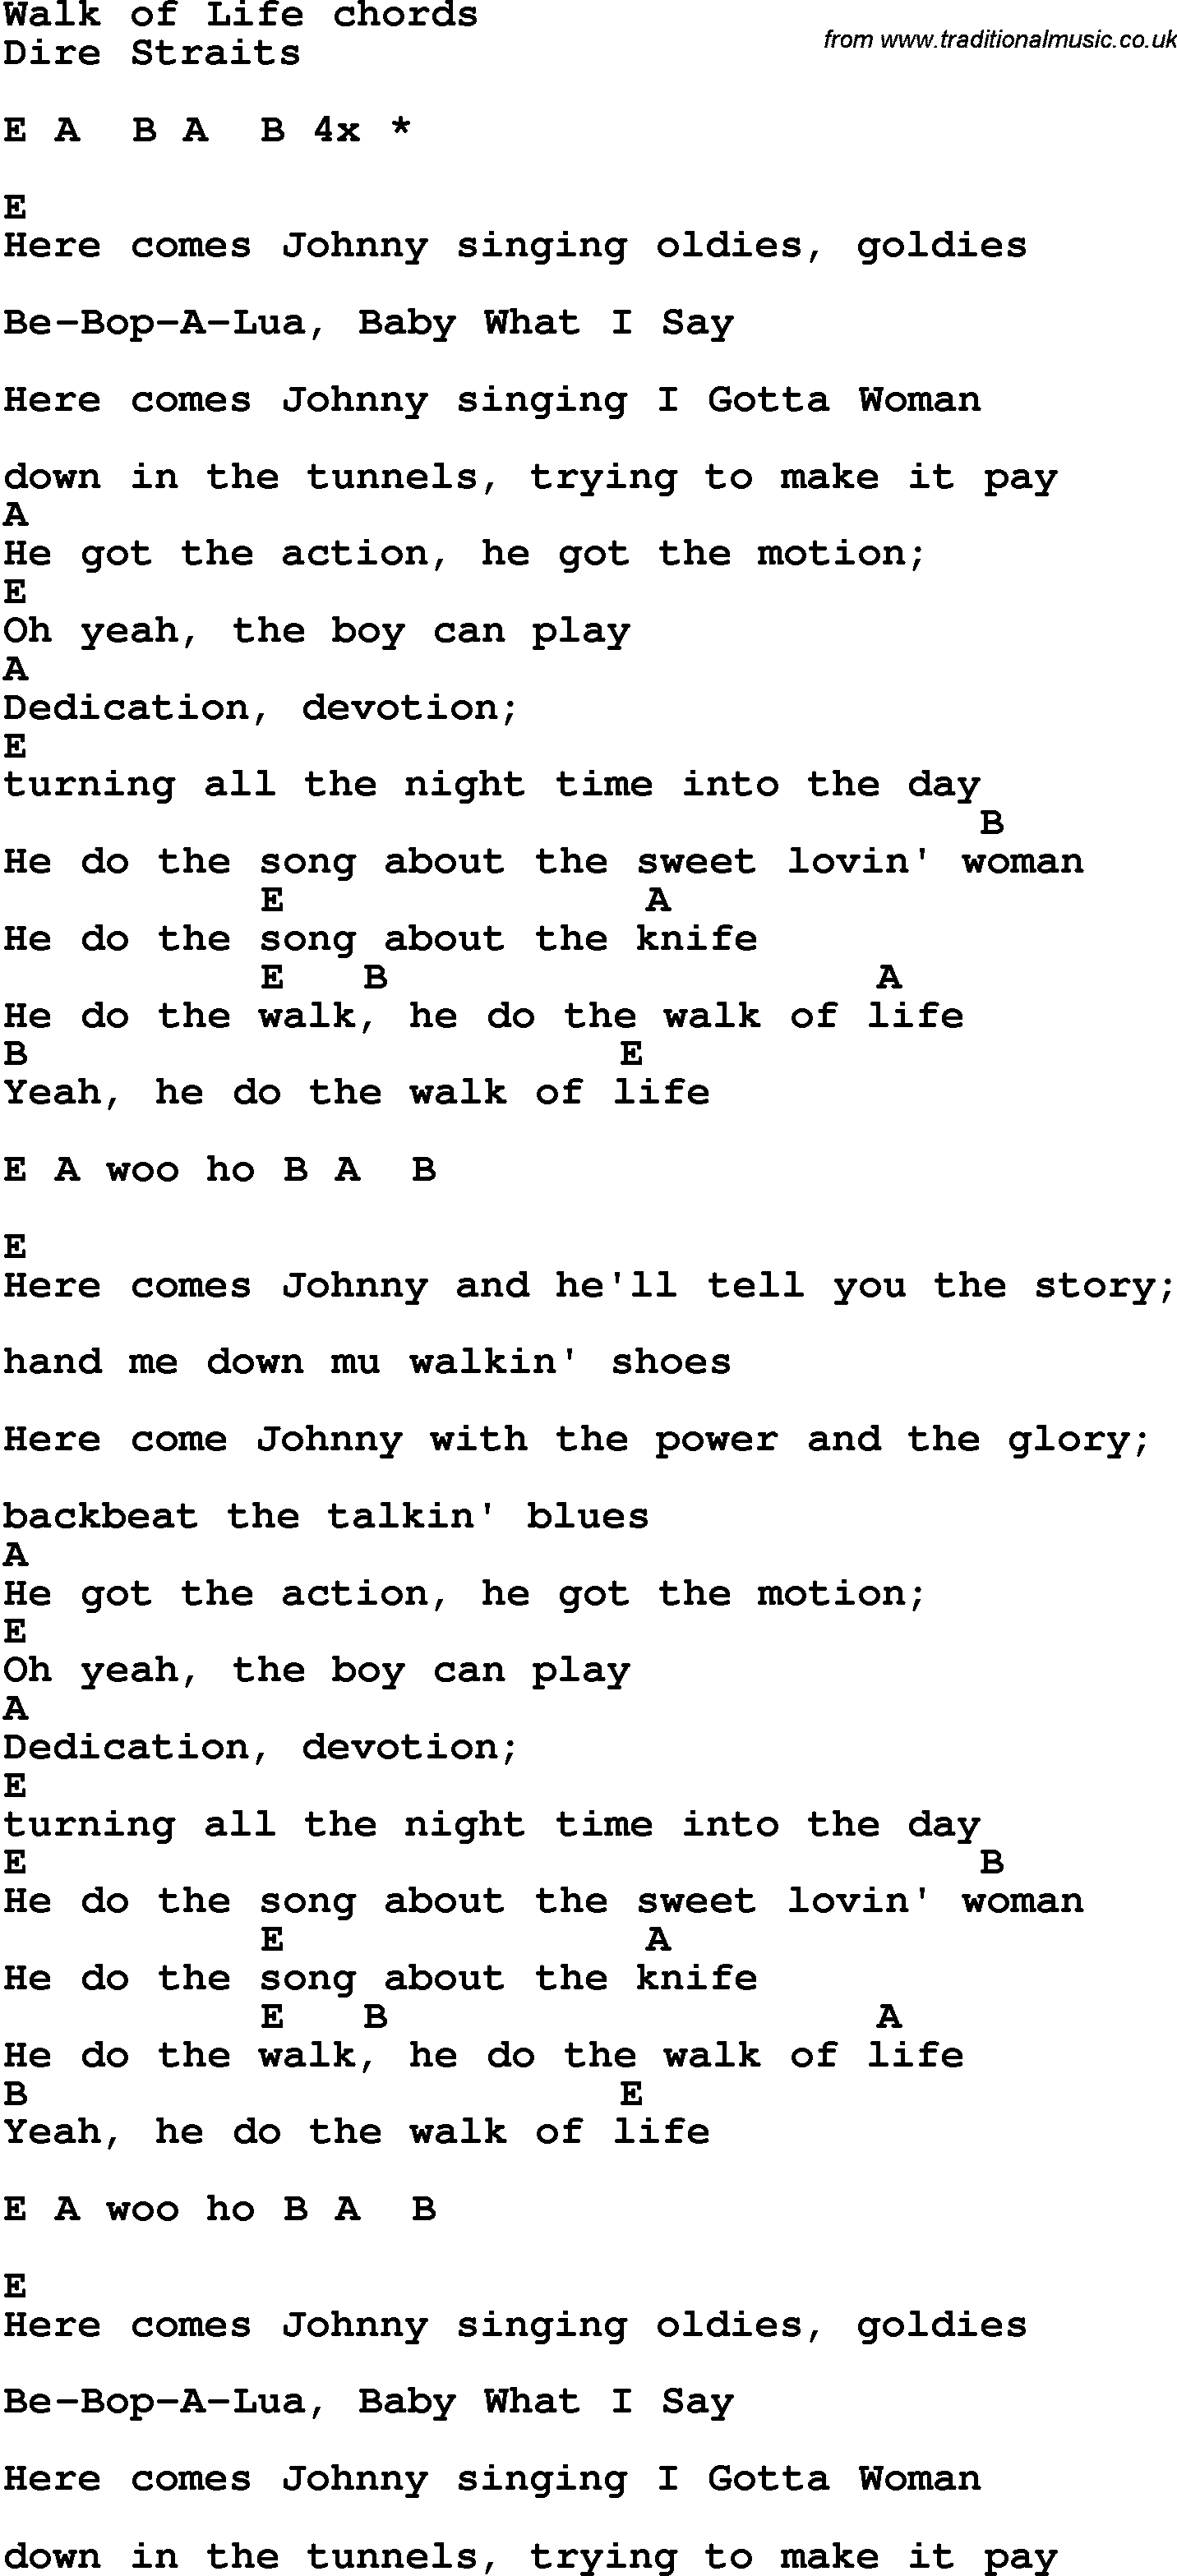 Song Lyrics with guitar chords for Walk Of Life